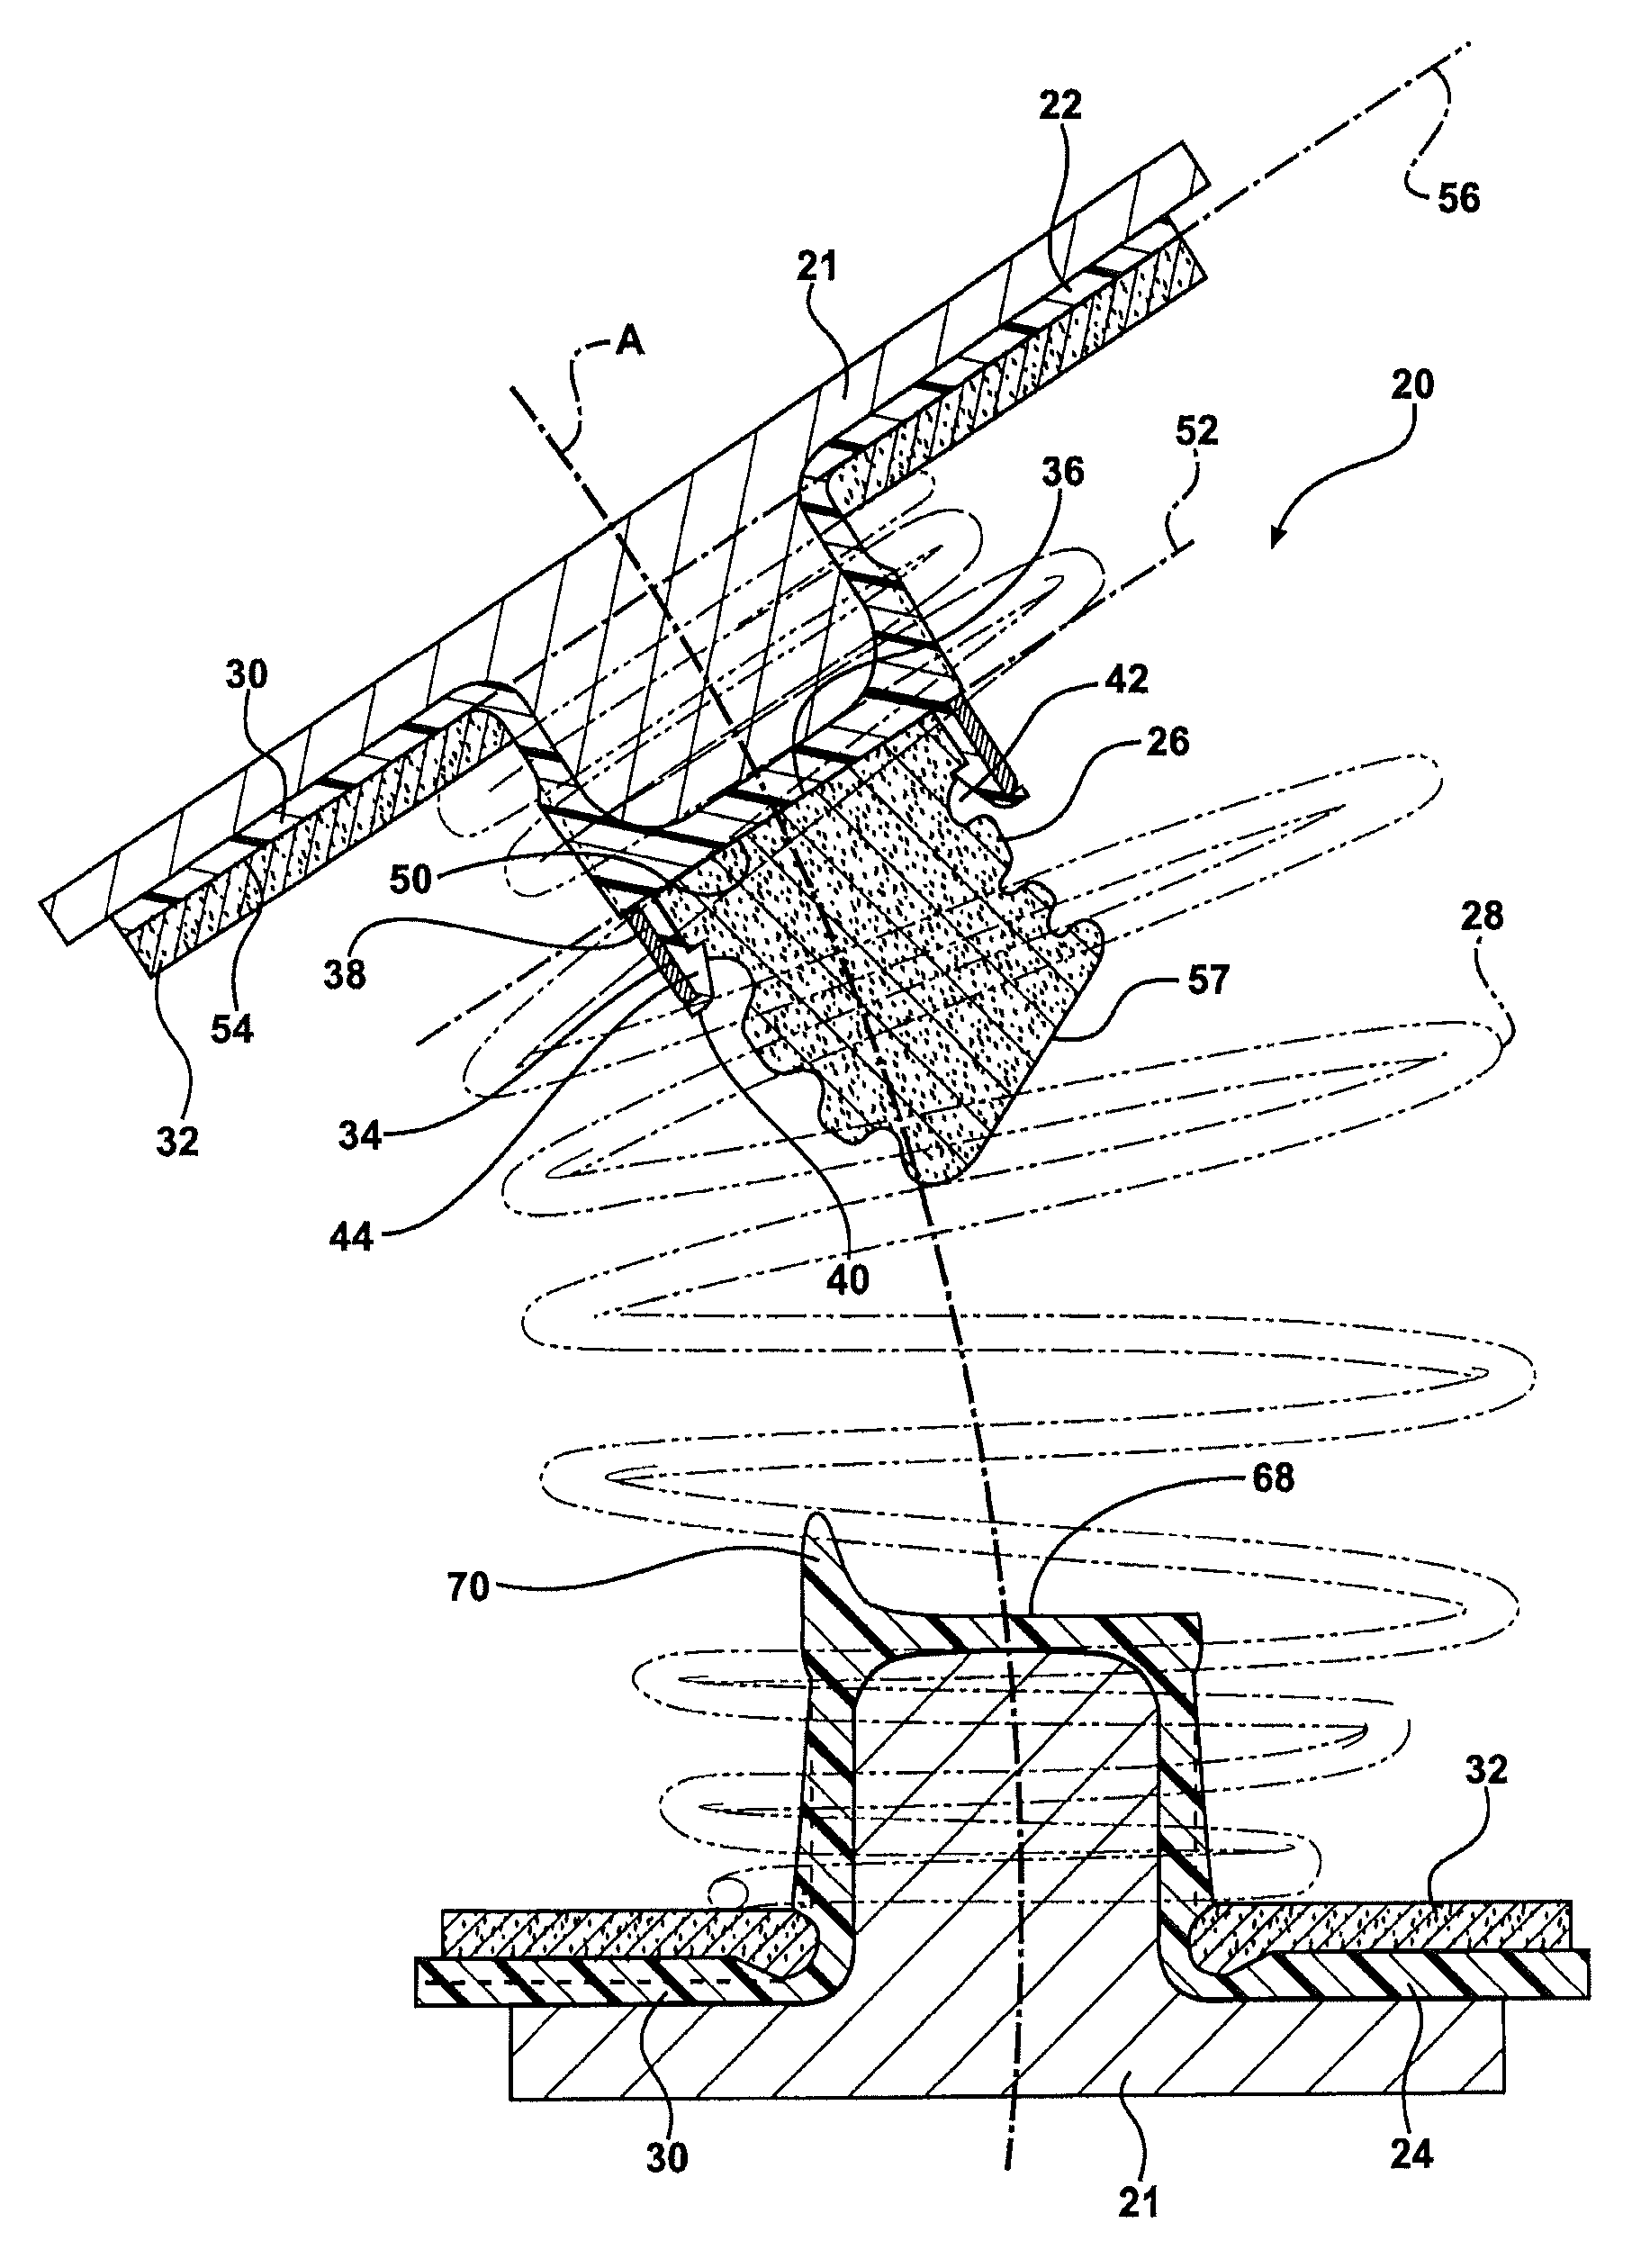 Insulator for a vehicle suspension system